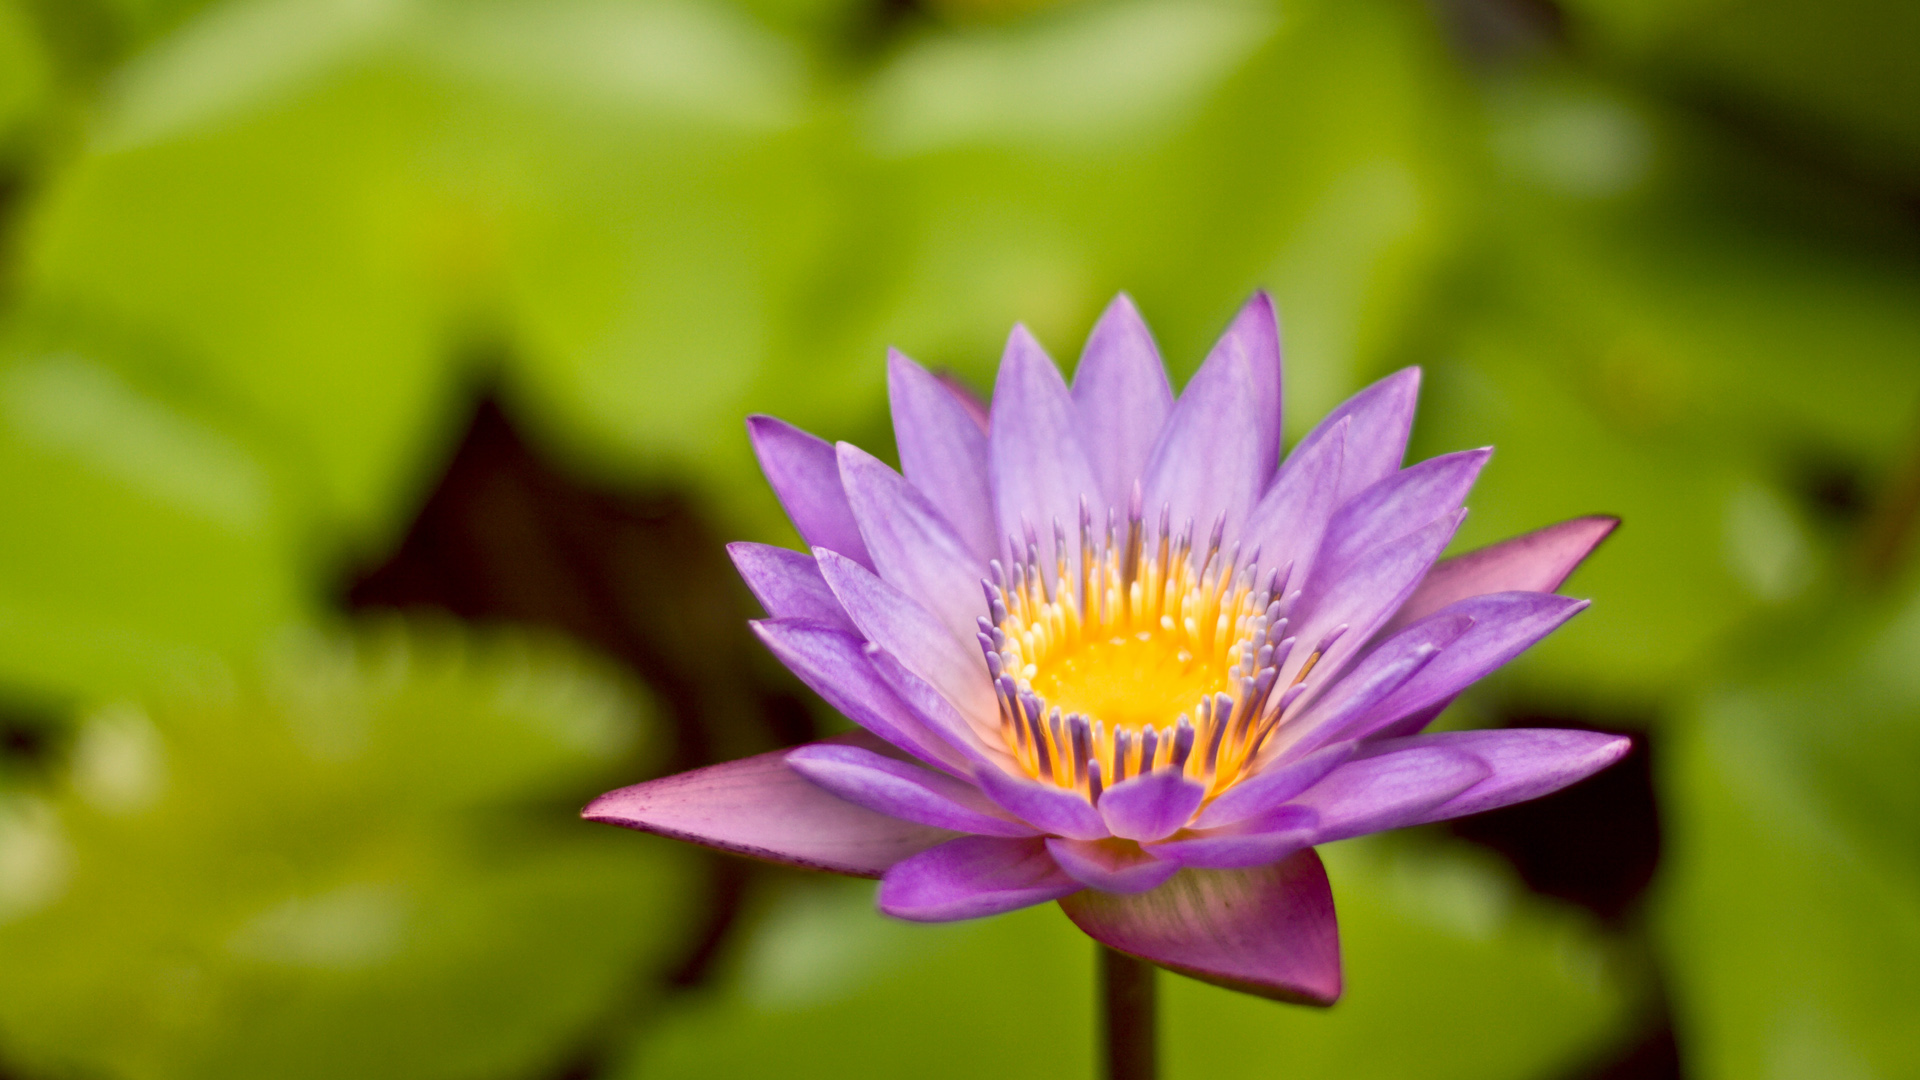 flowers, lily pads, pink flowers, blurred background, water lilies - desktop wallpaper